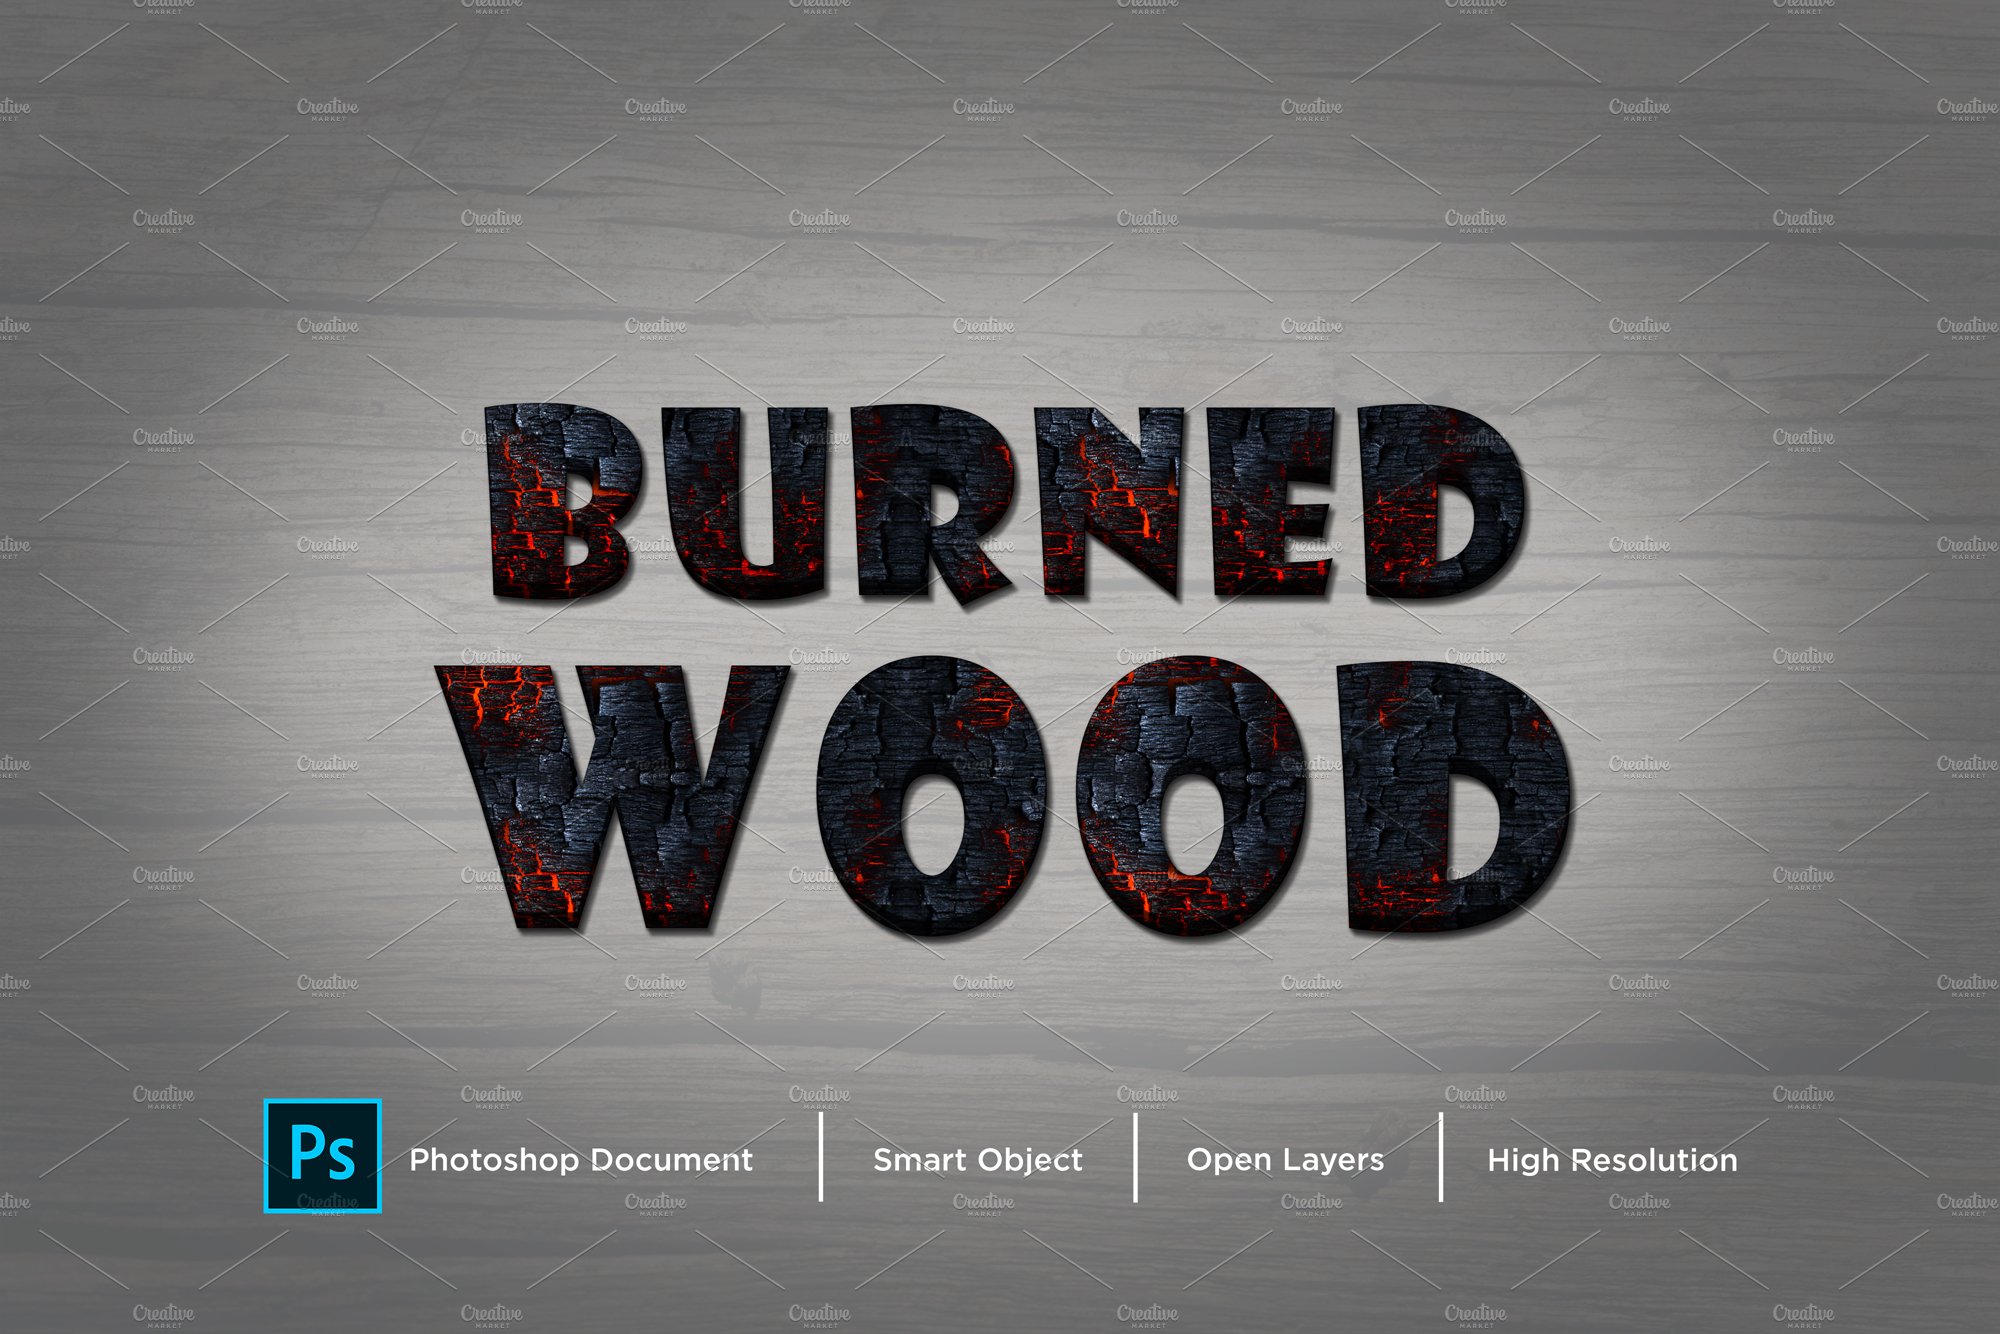 Burned woodText Effect & Layer Stylecover image.